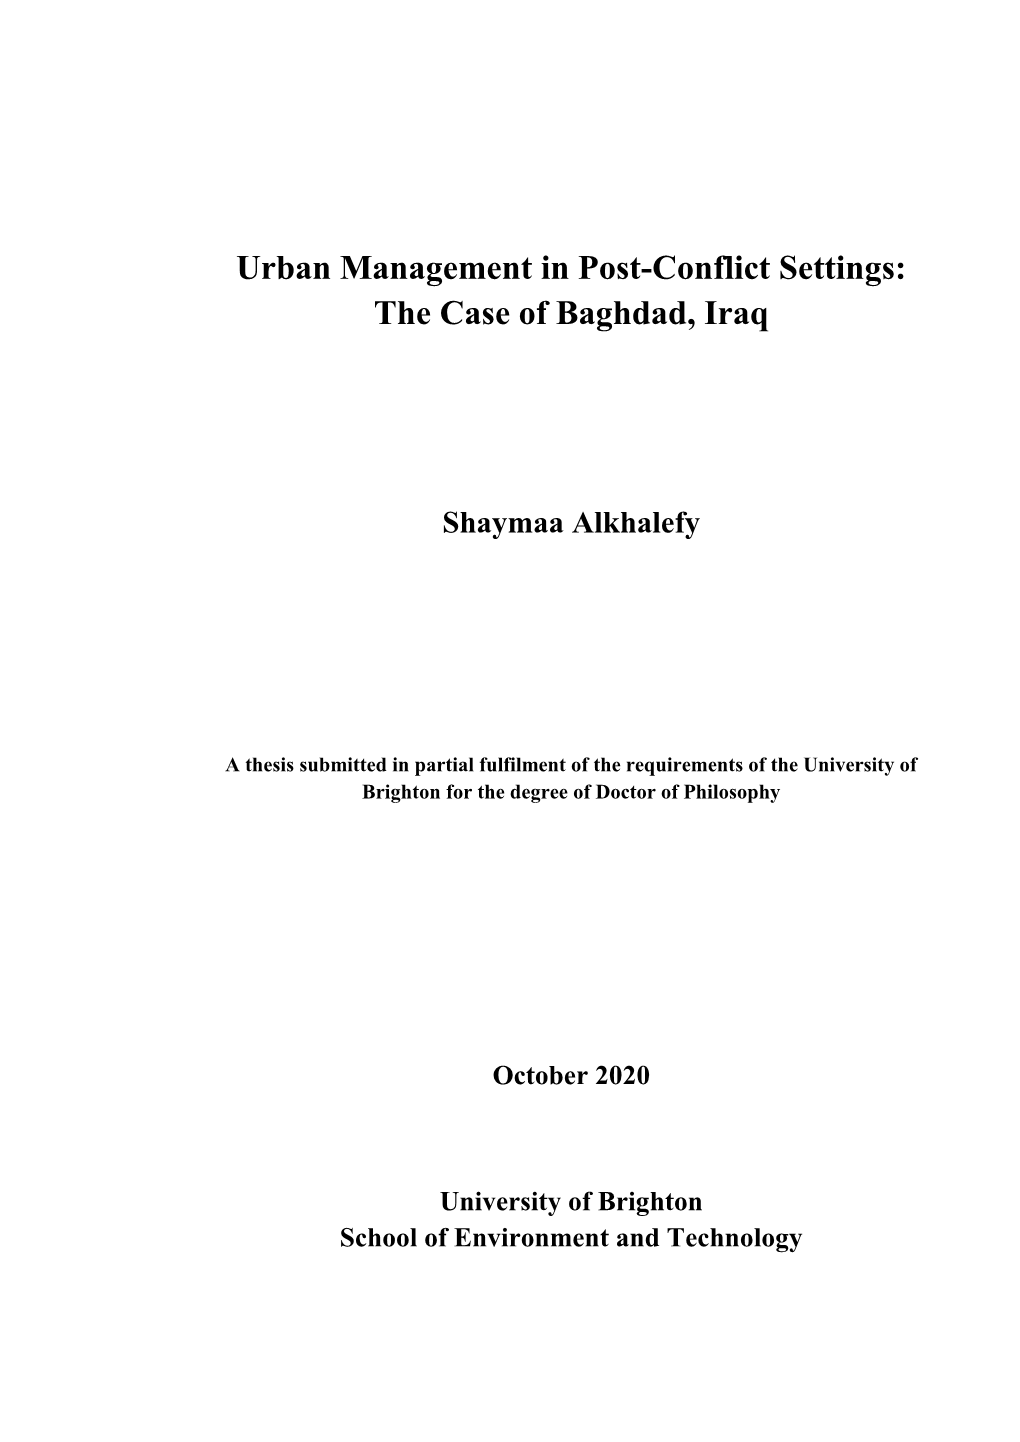 Urban Management in Post-Conflict Settings: the Case of Baghdad, Iraq